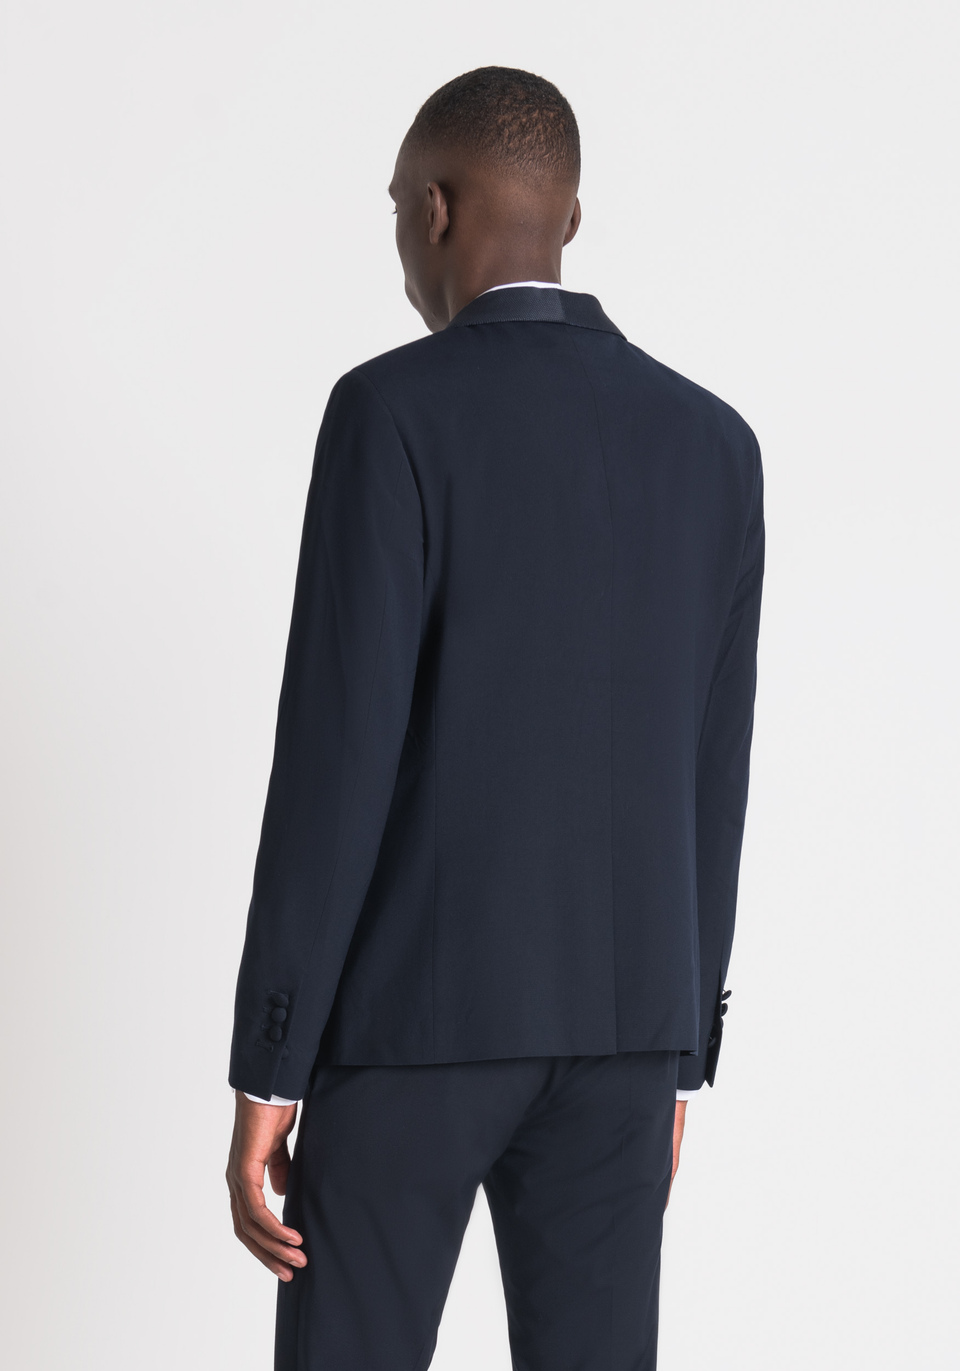 SLIM-FIT “BLANCHE” JACKET WITH MICRO-WOVEN SATIN DETAILS - Antony Morato Online Shop